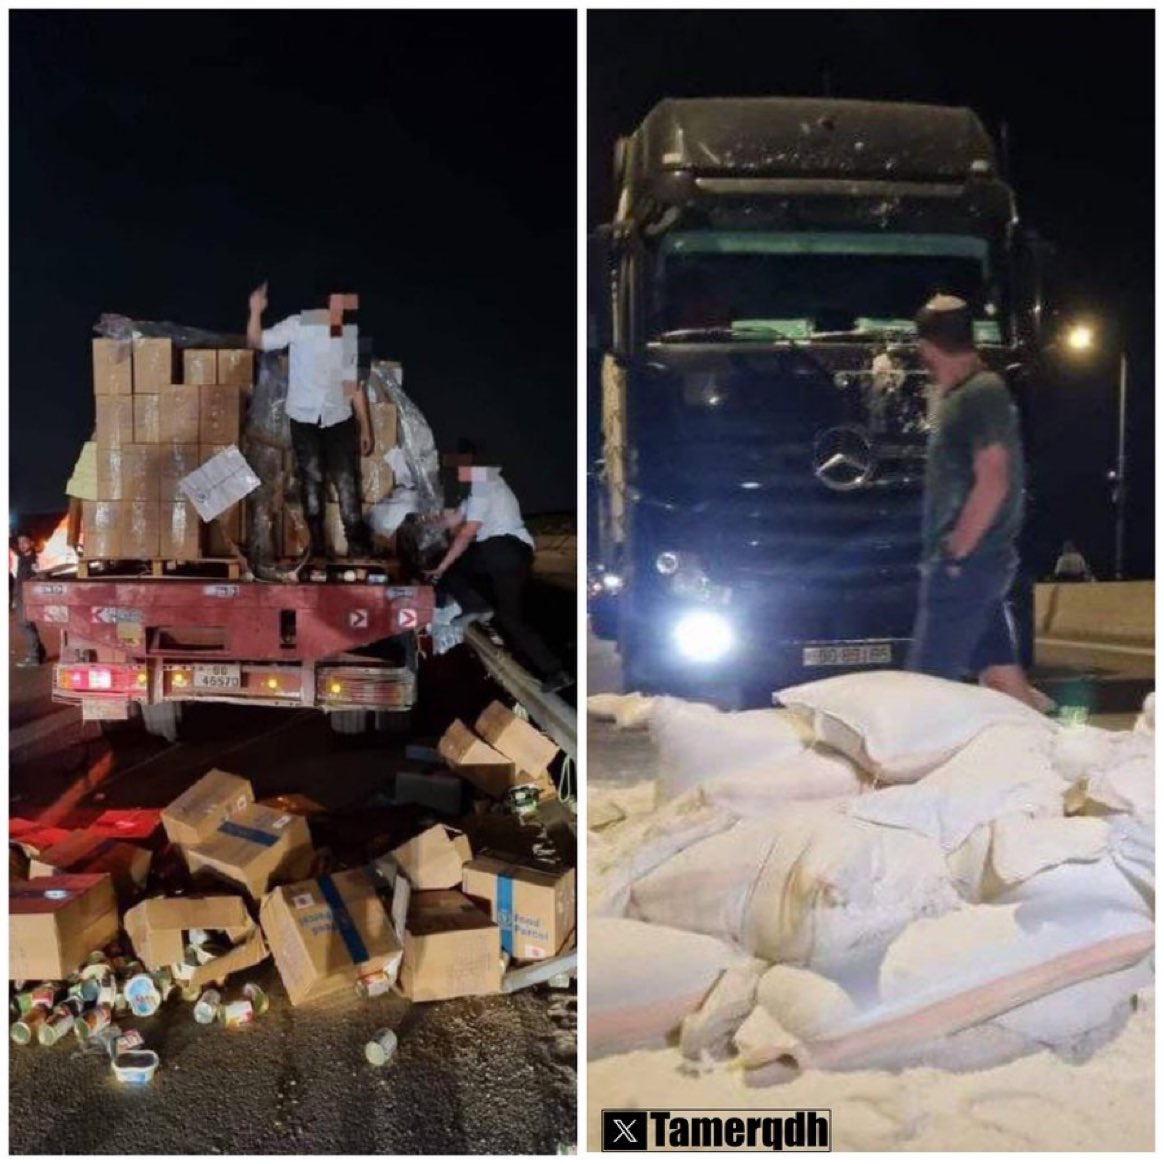 Israeli settlers blocked the road for aid convoys from Jordan destined for Gaza, assaulting their drivers and callously throwing desperately needed food and aid onto the roads. #ColumbiaUniversity #IsraeliNewNazism #Palestine